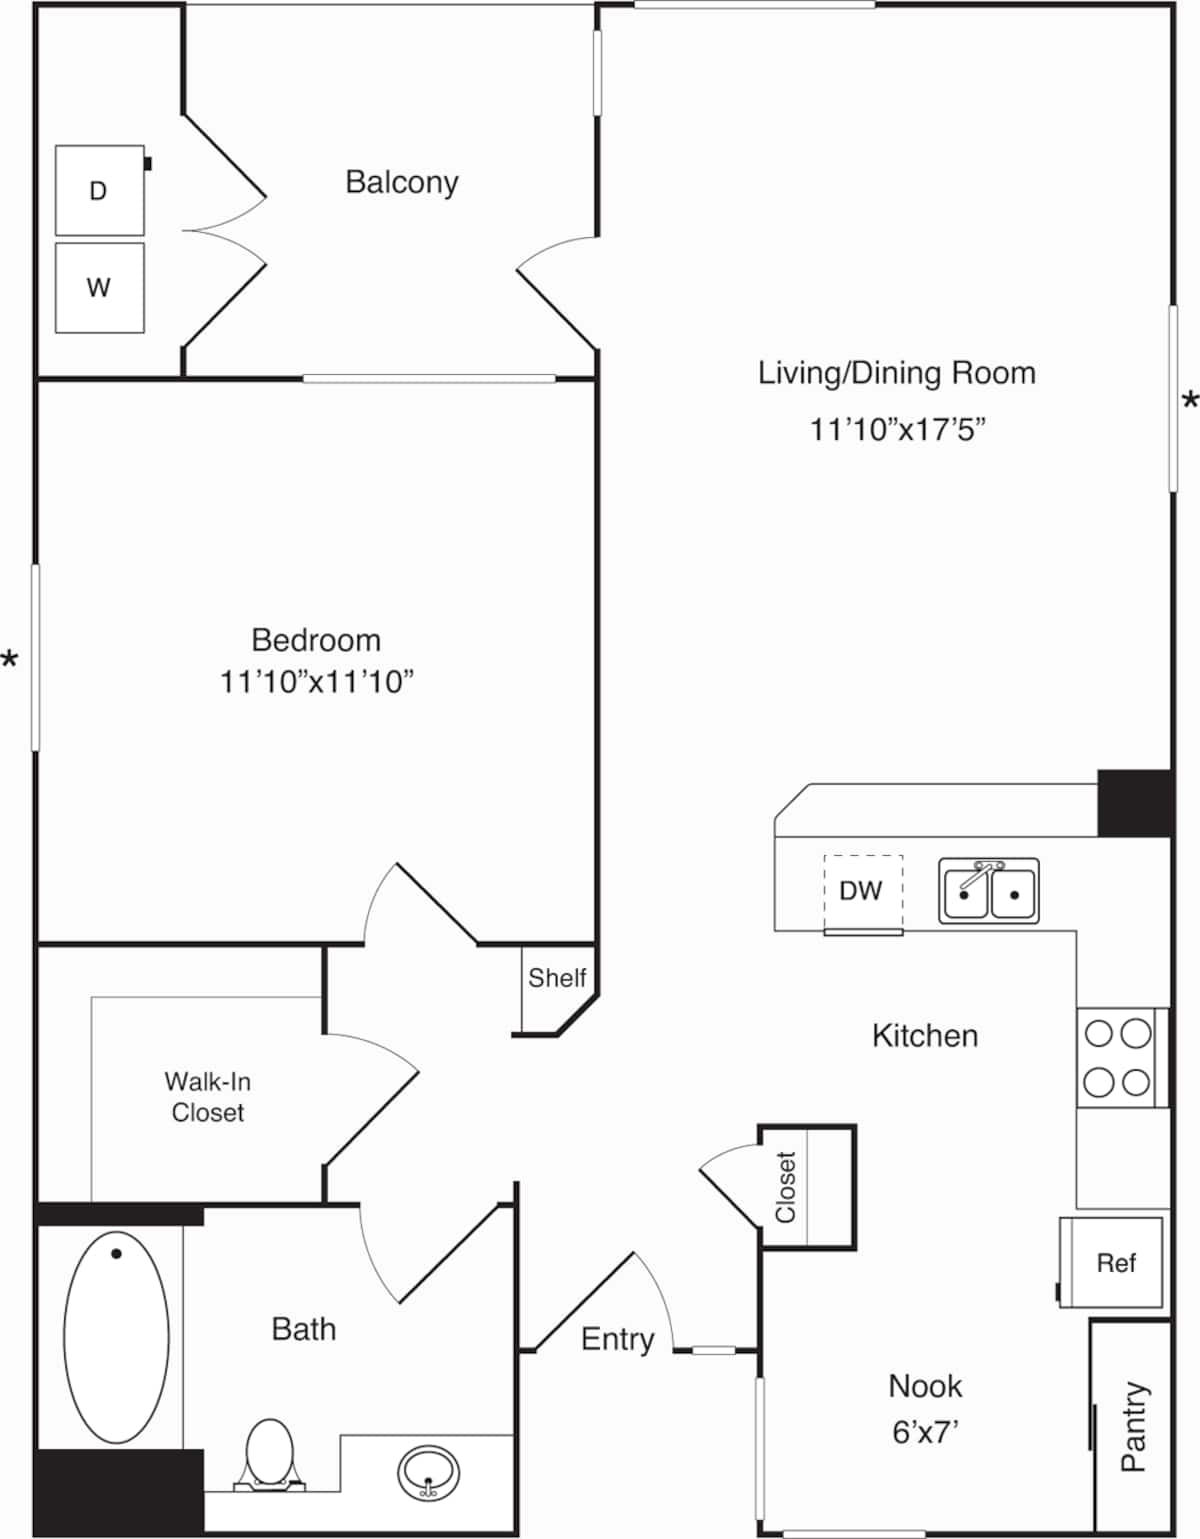 Floorplan diagram for A- The Summit, showing 1 bedroom